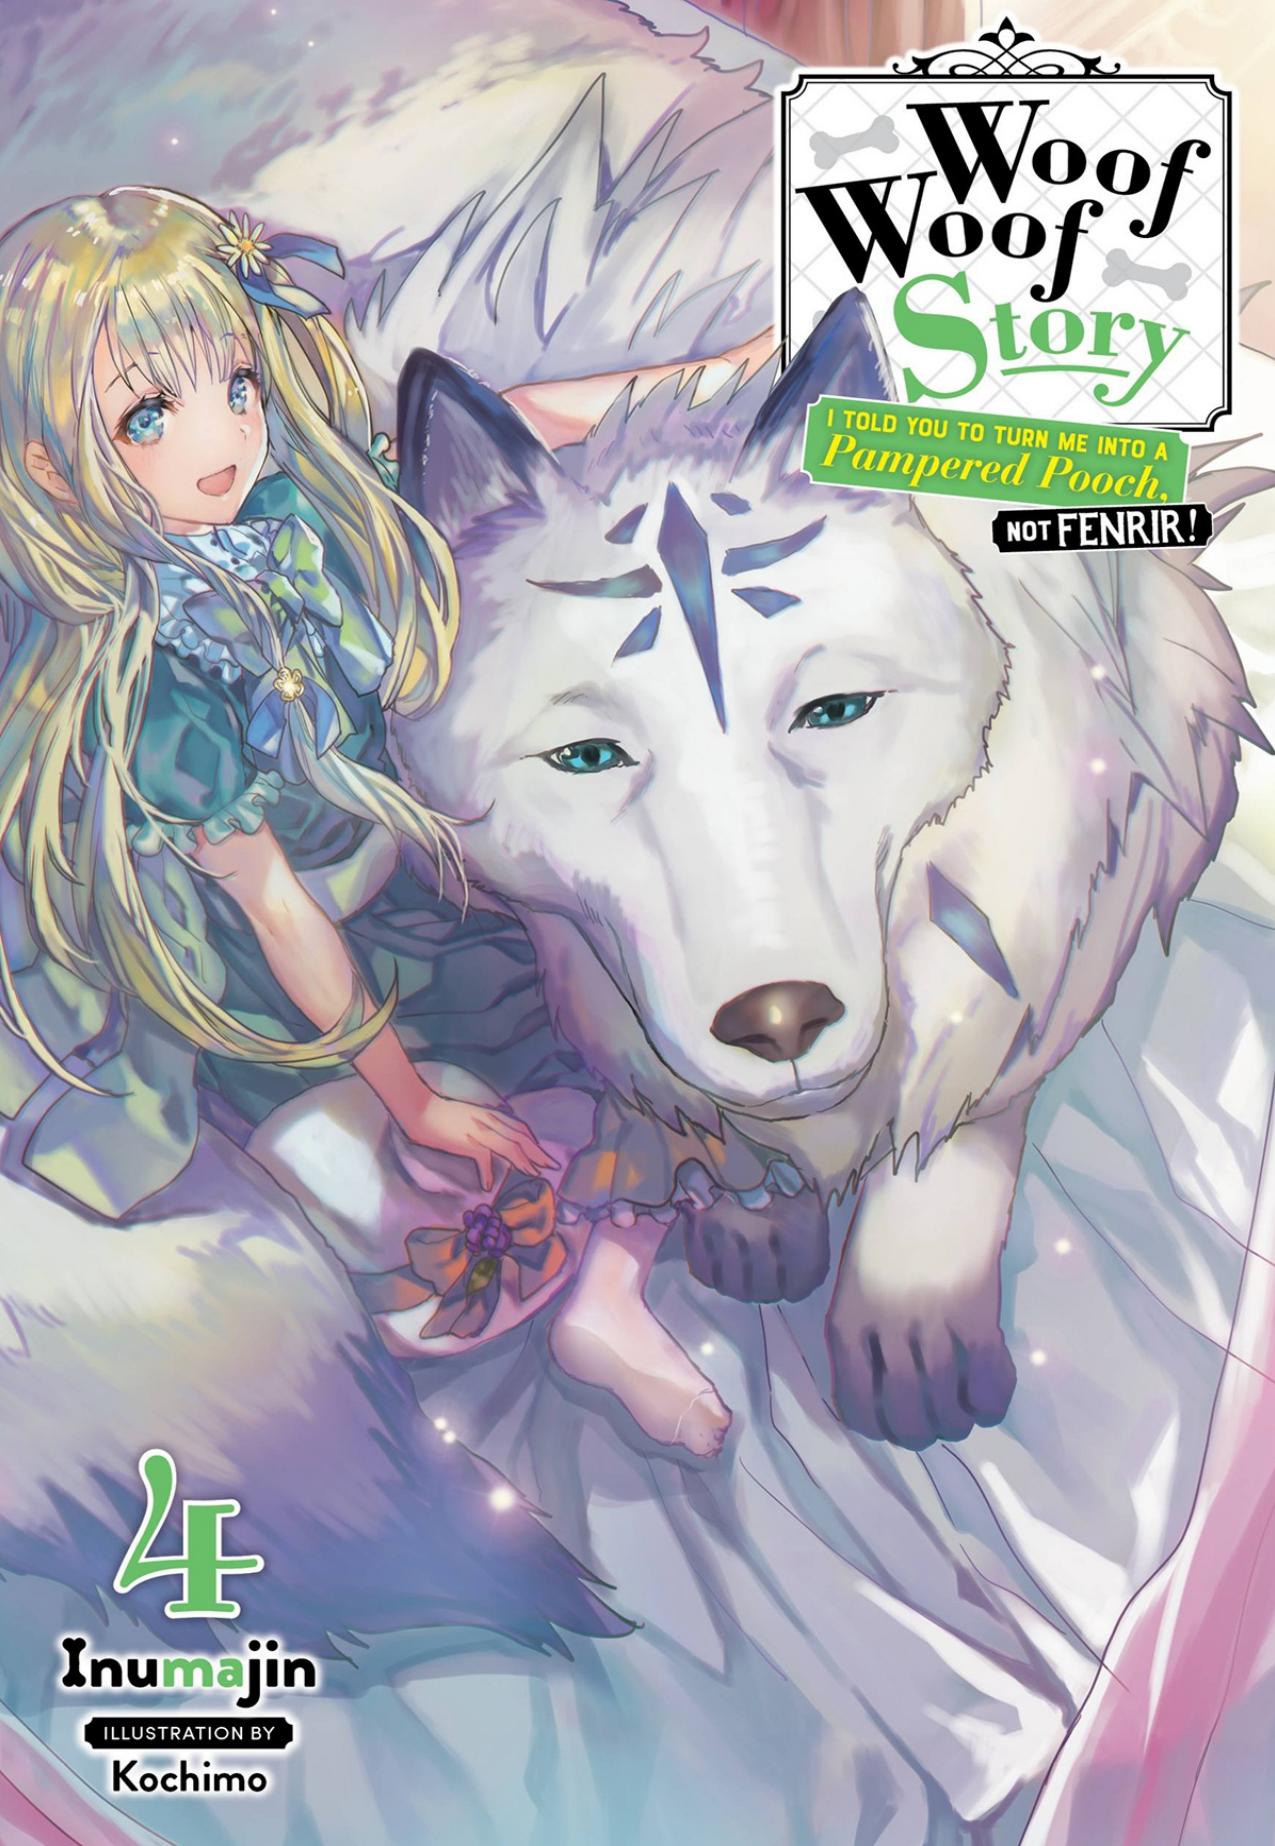 Woof Woof Story: I Told You to Turn Me Into a Pampered Pooch, Not Fenrir!, Vol. 4 (light novel) (Woof Woof Story (light novel)) by Inumajin